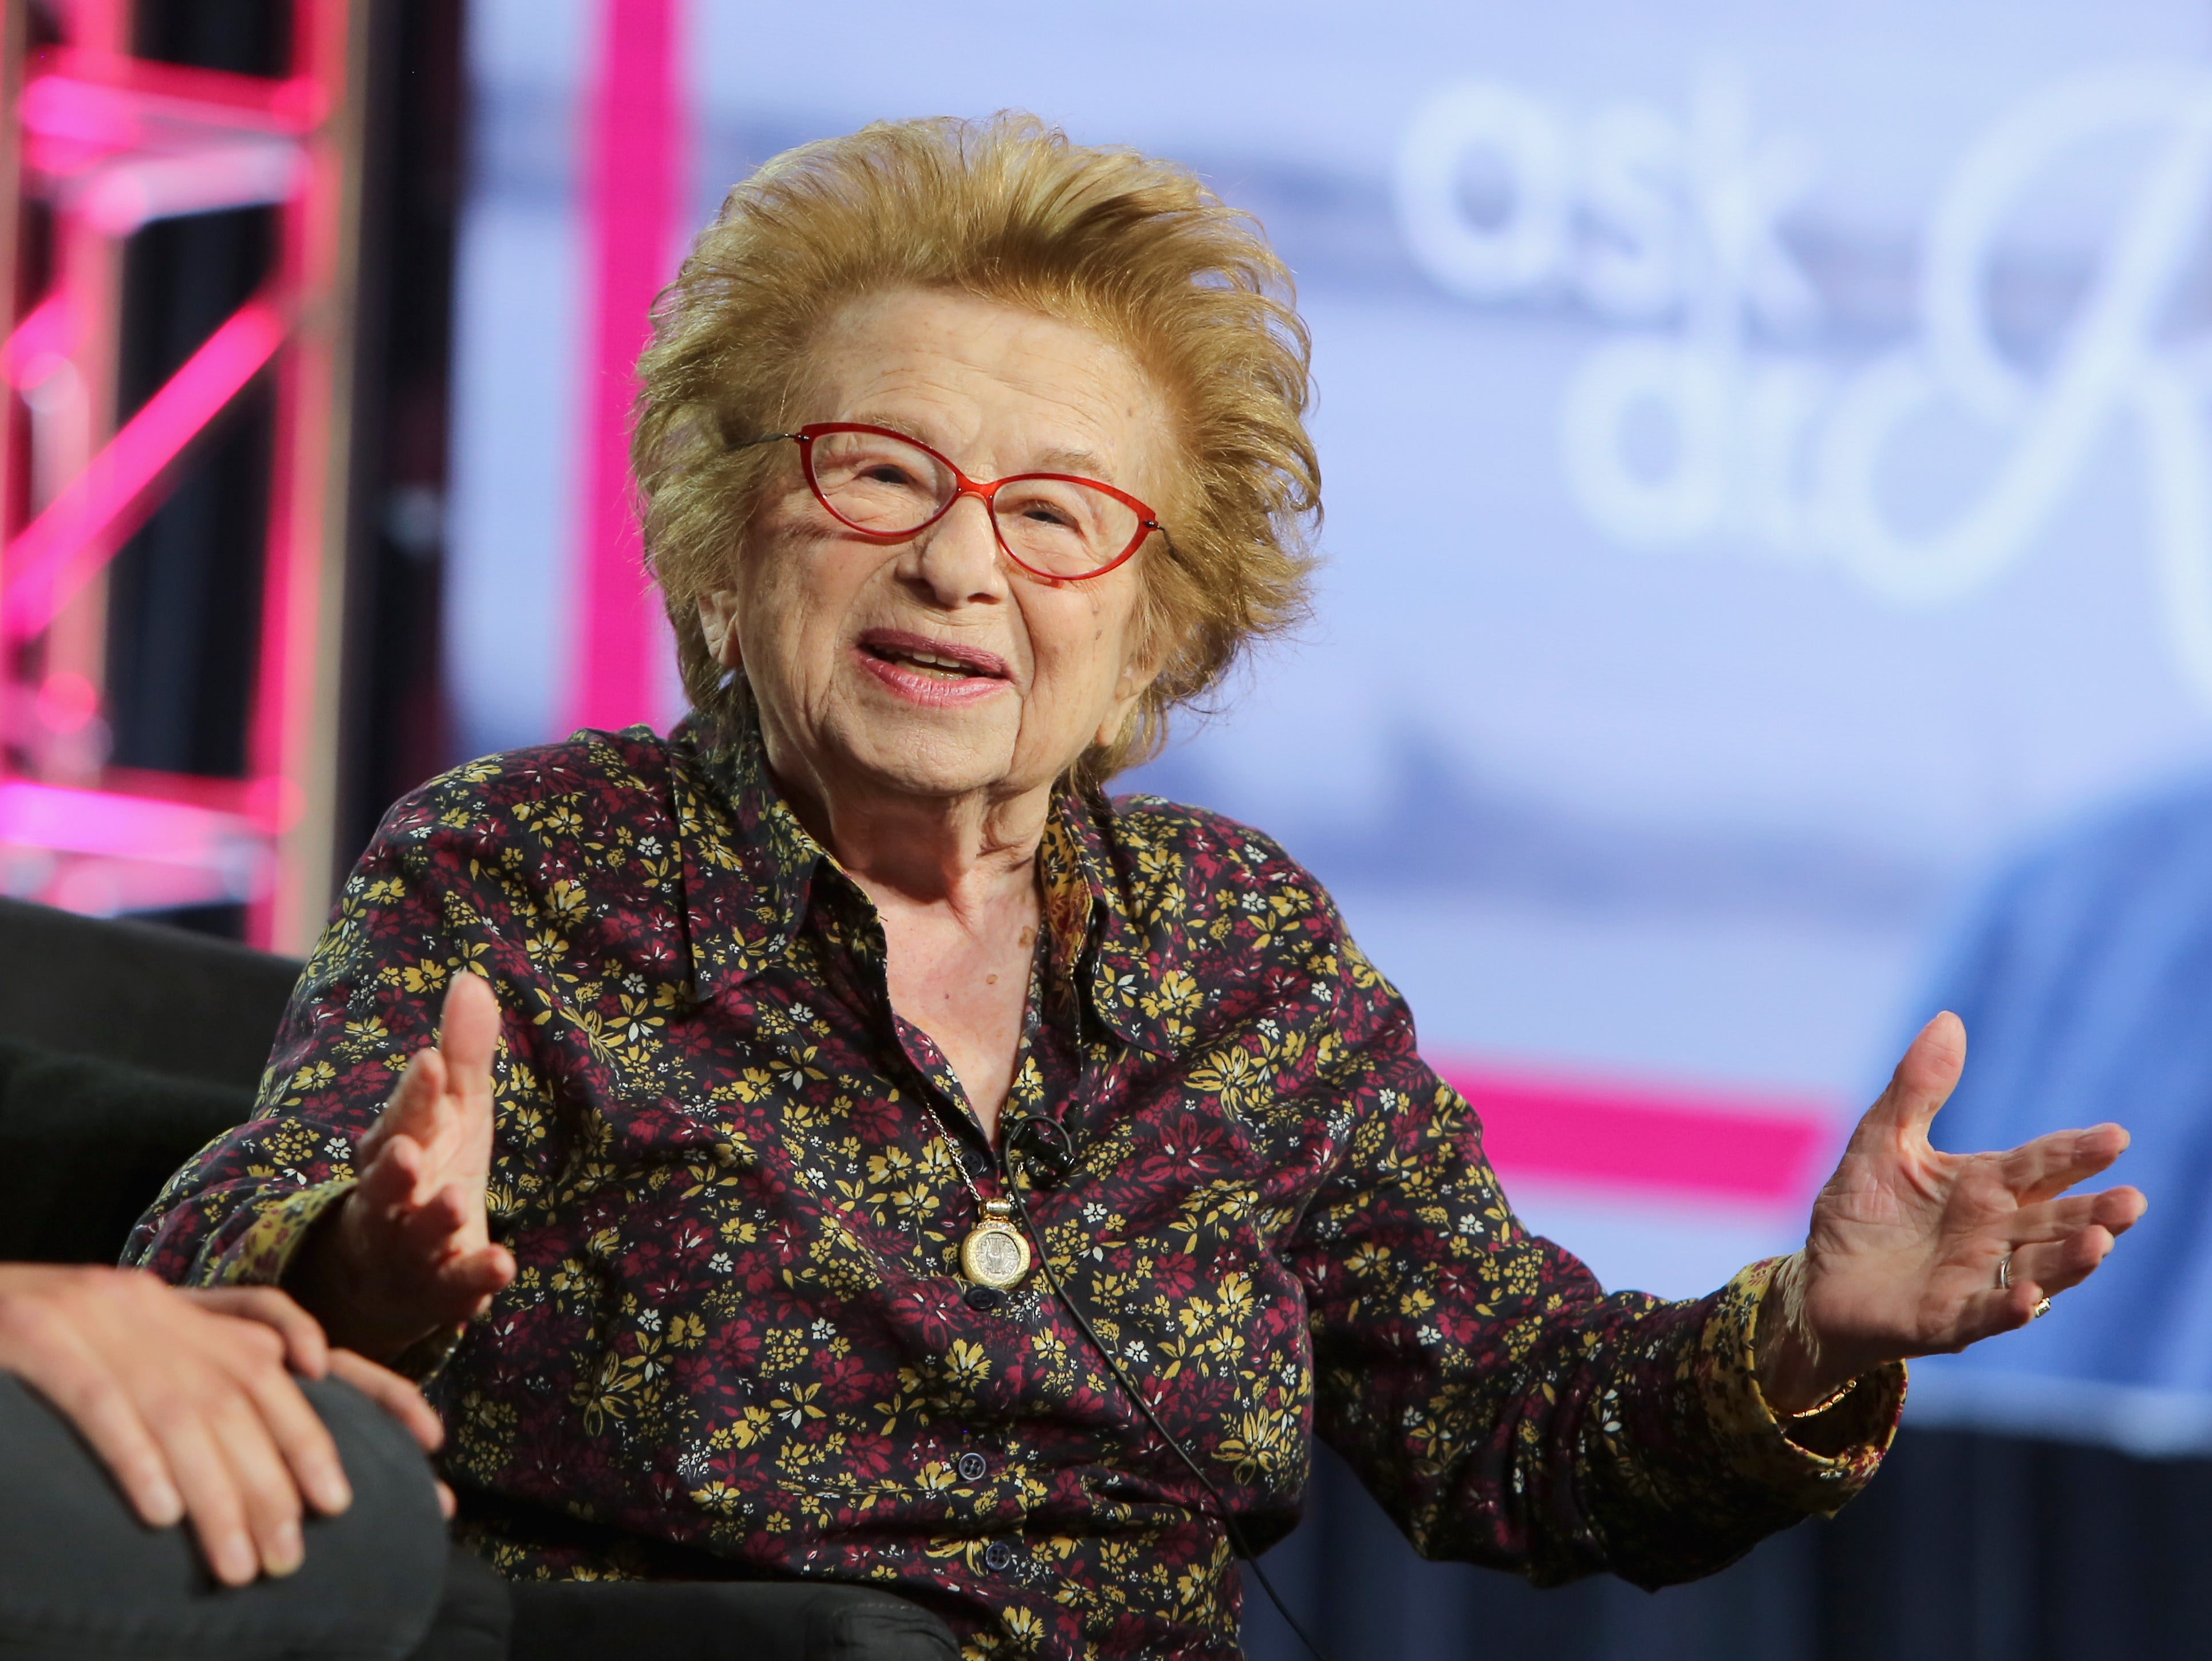 Thanks to her television show, books, and other sources of income, Dr. Ruth had an estimated net worth of $3 million at the time of her death.